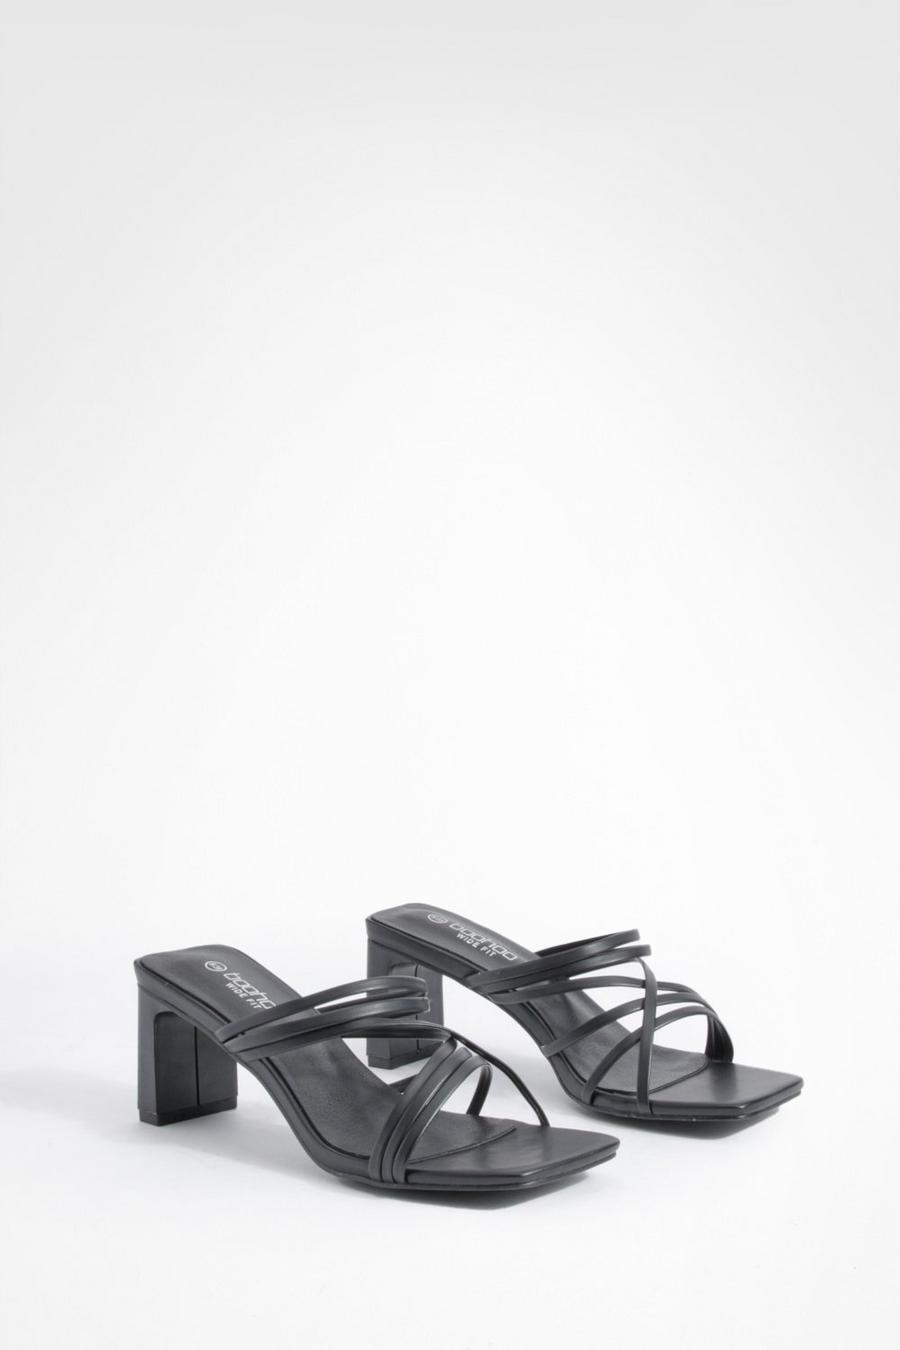 Black Wide Width Strappy Low Block Heeled Mules